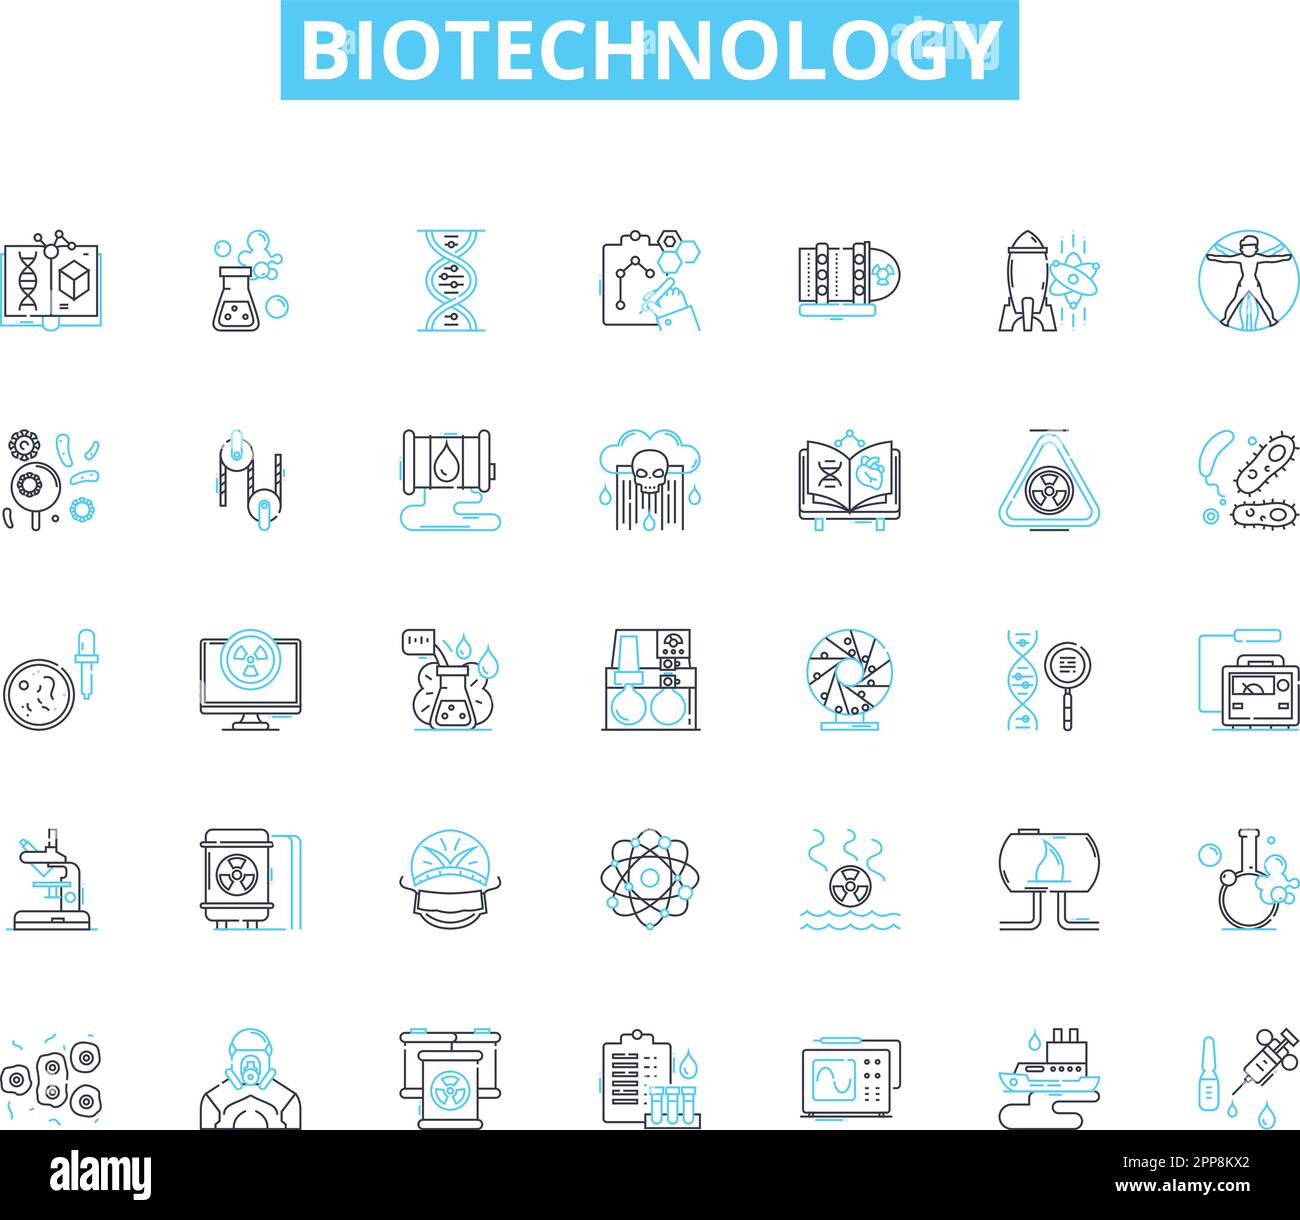 Biotechnology linear icons set. Genetic, Microorganisms, Cloning, Genome, Nanotechnology, Vaccines, Probiotics line vector and concept signs Stock Vector